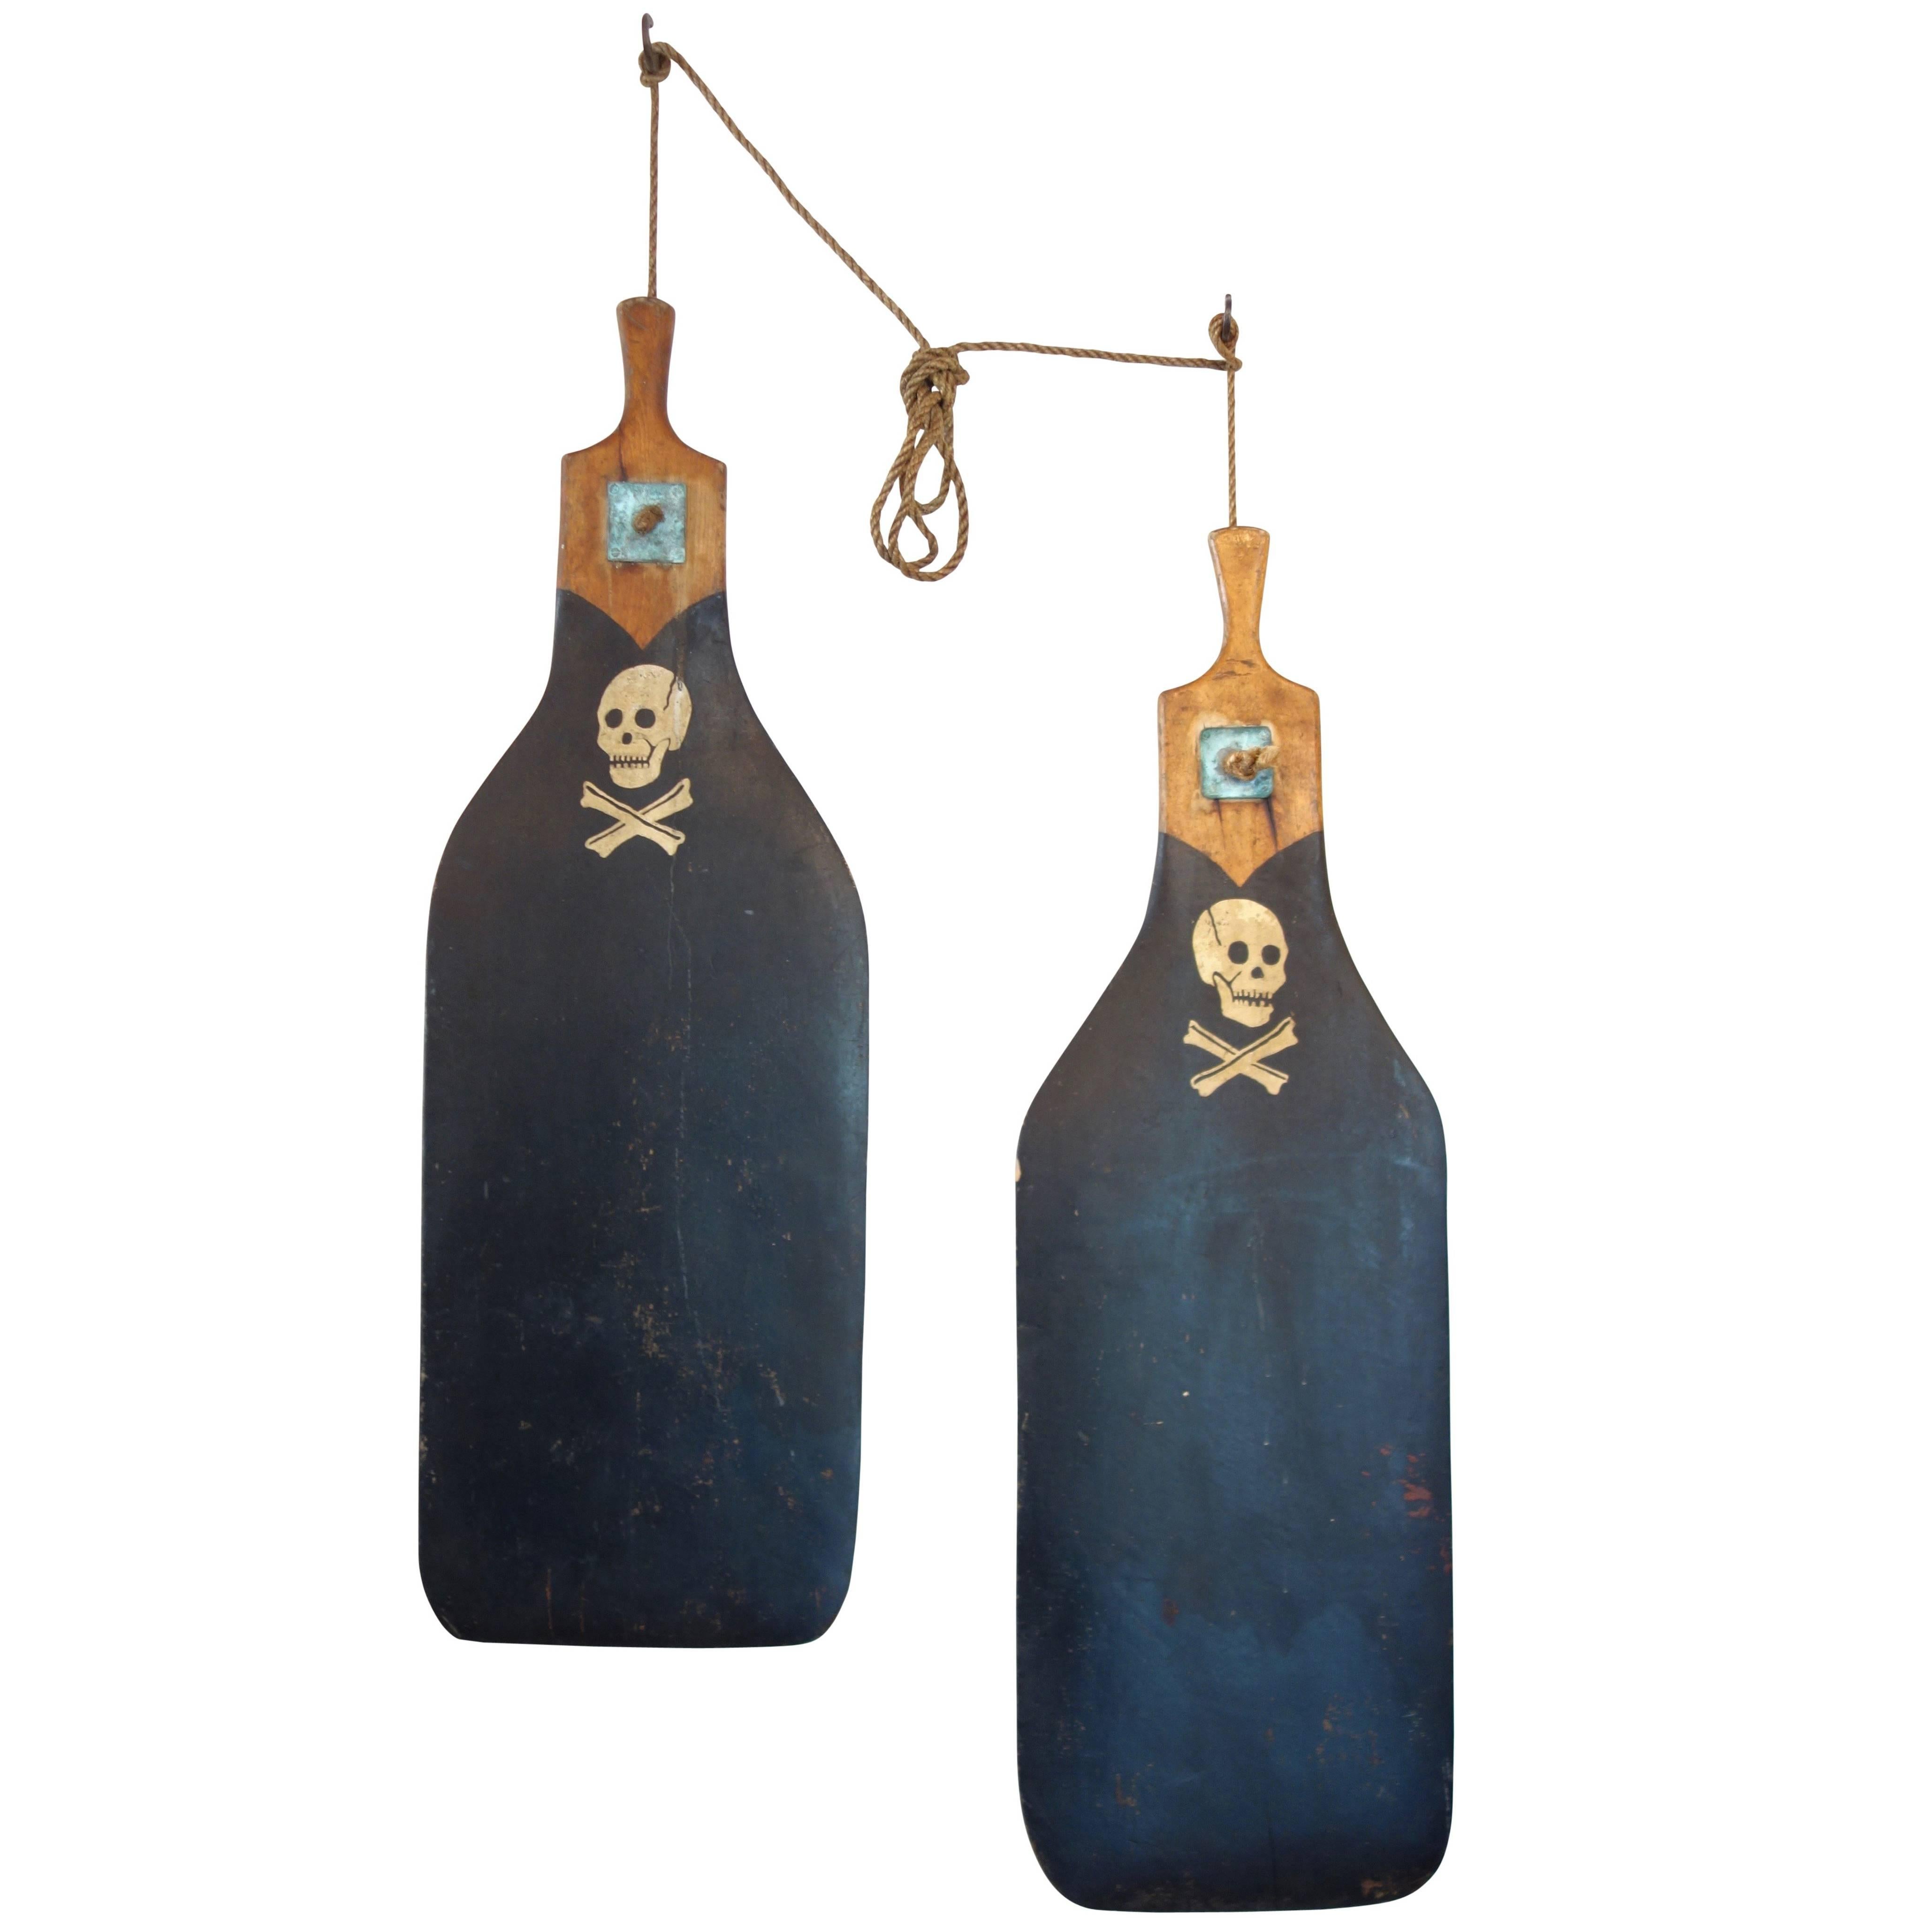 Pair of Boat Rudders with Hand-Painted Skull and Crossbones, circa 1930